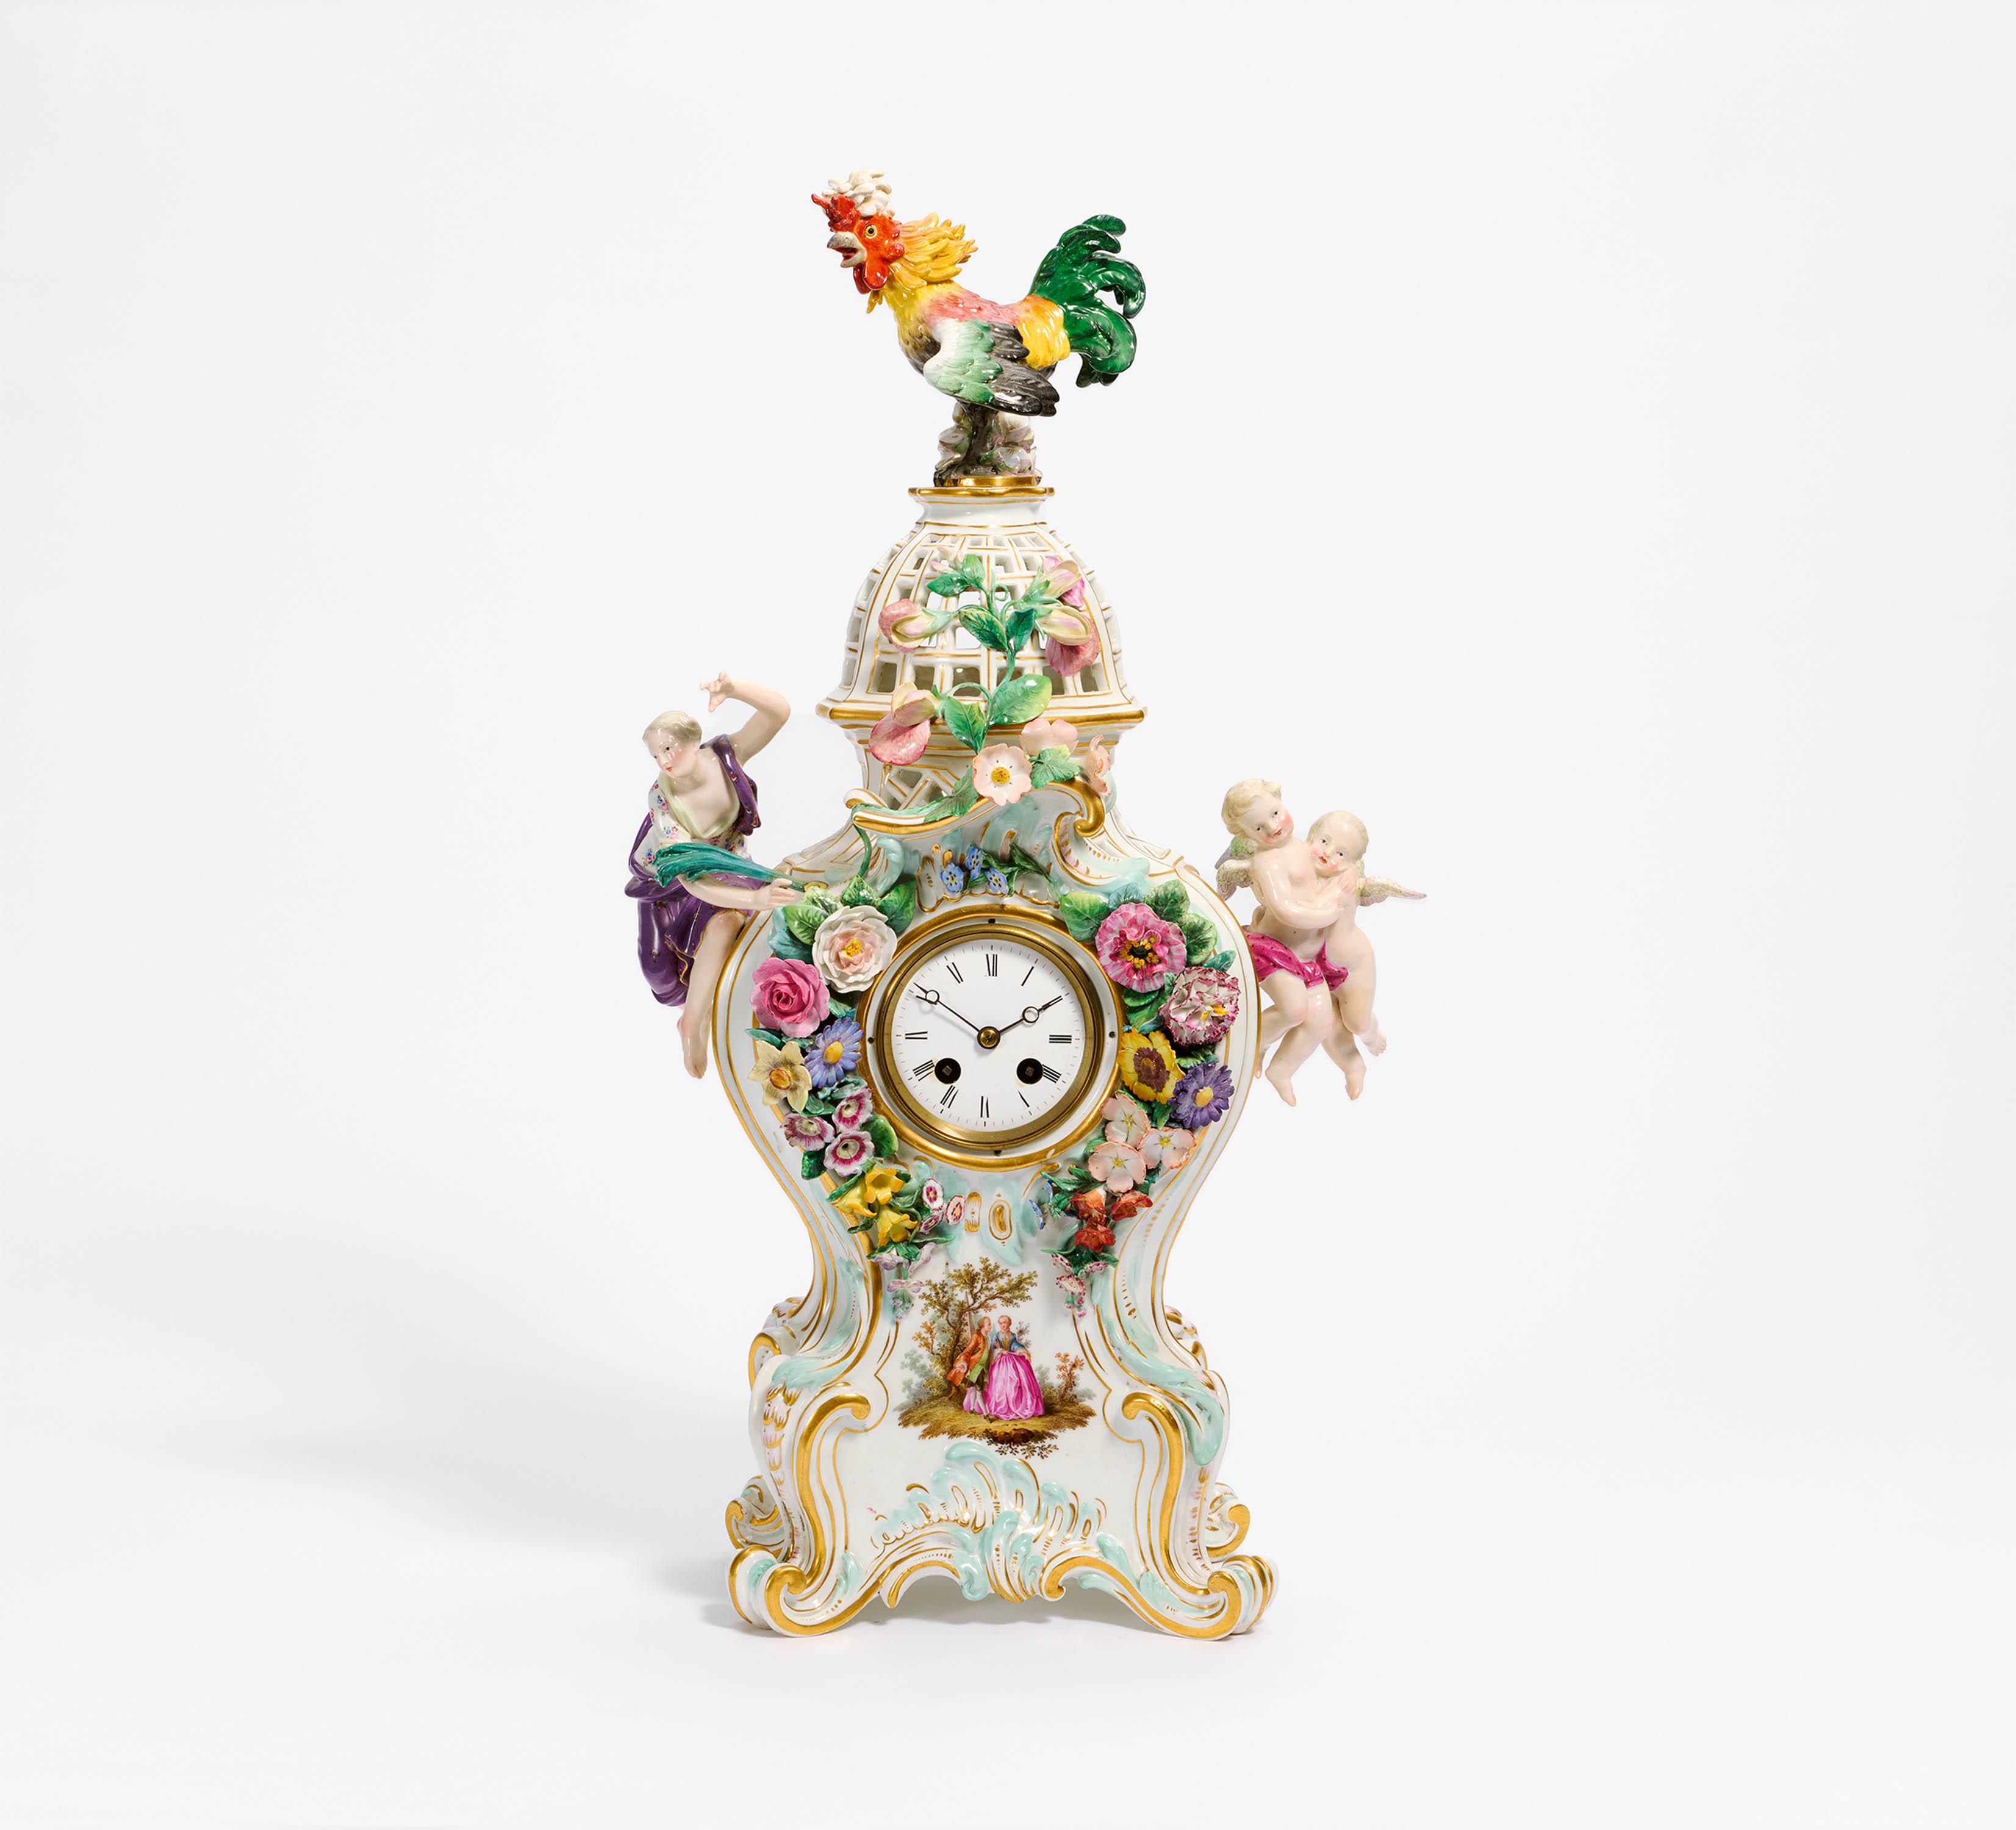 Pendulum clock with rooster